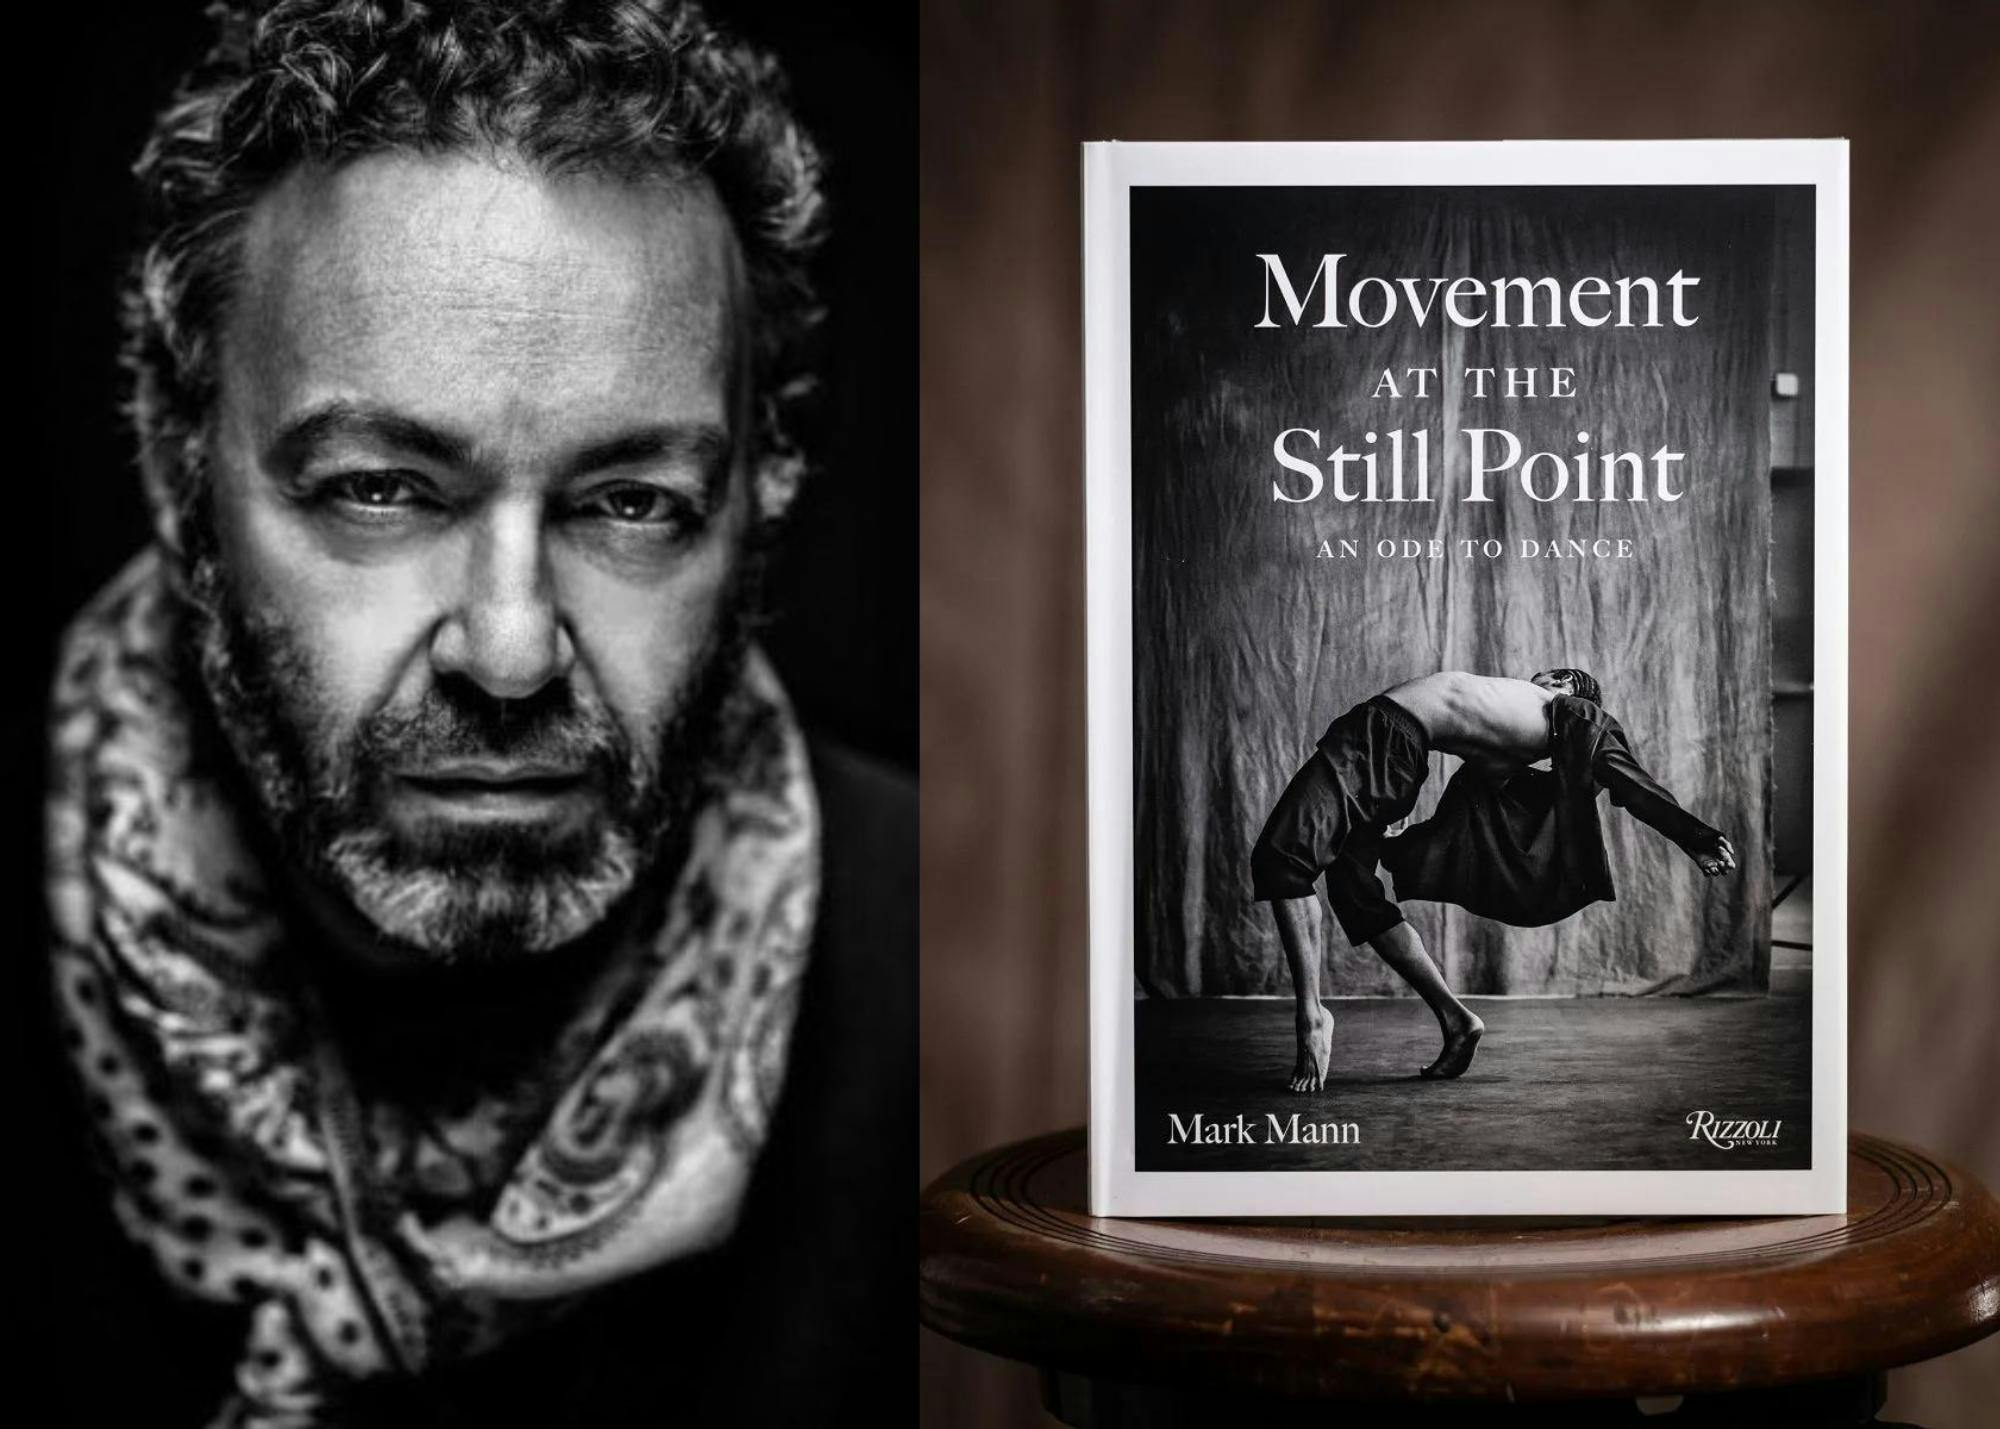 Mark Mann's movement at the still point - an art event in the Hamptons